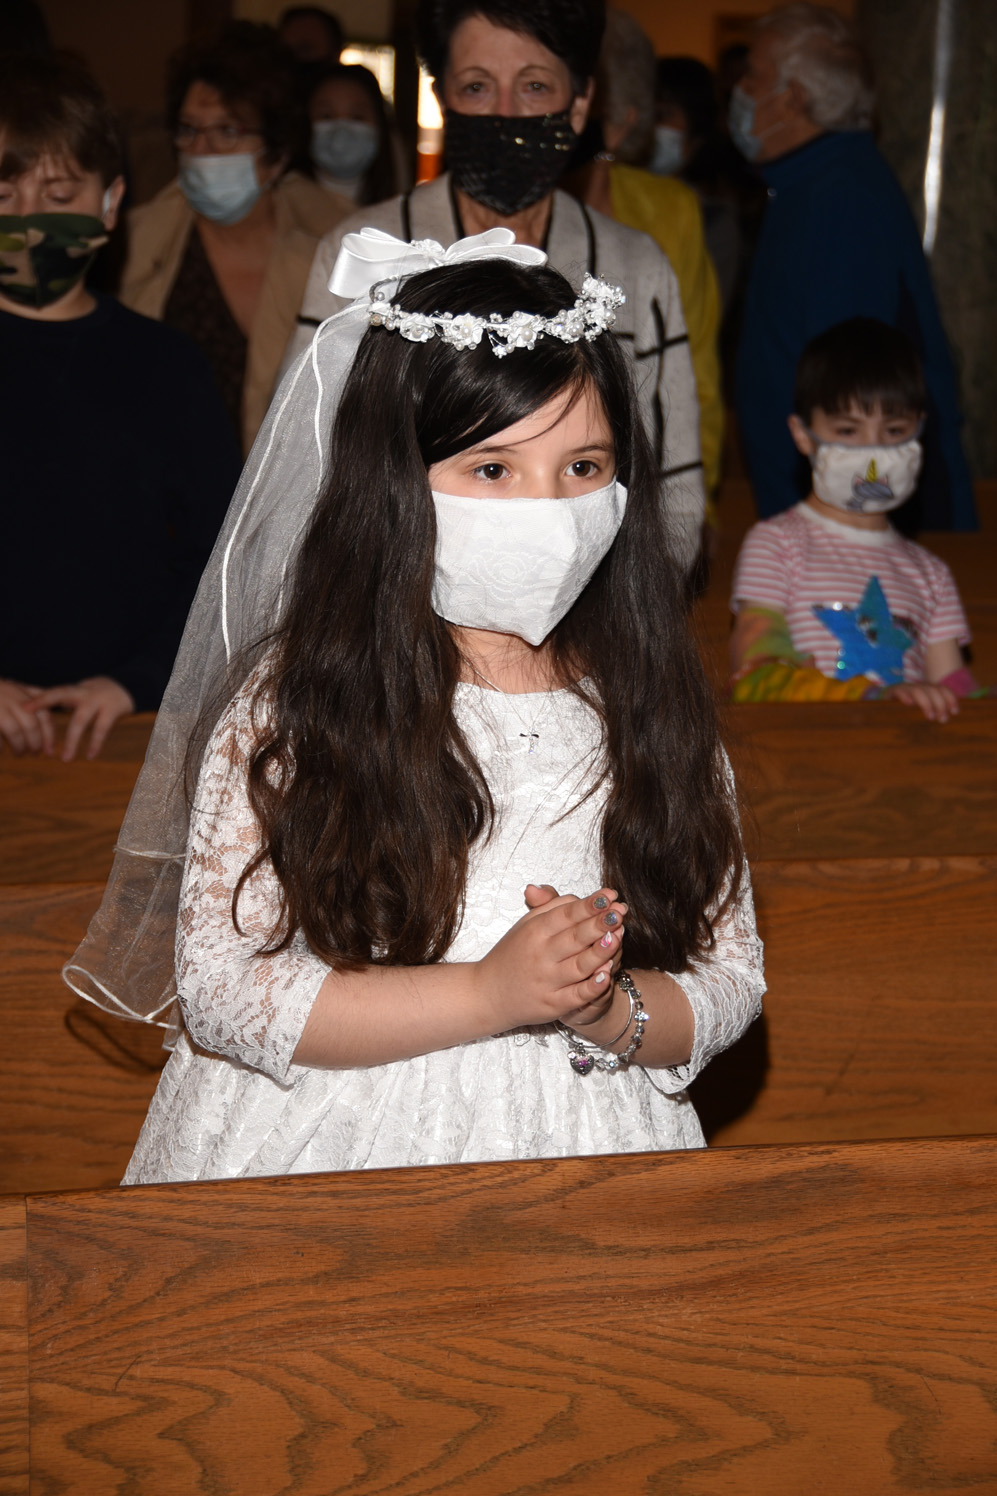 FIRST-COMMUNION-MAY-2-2021-1001001045